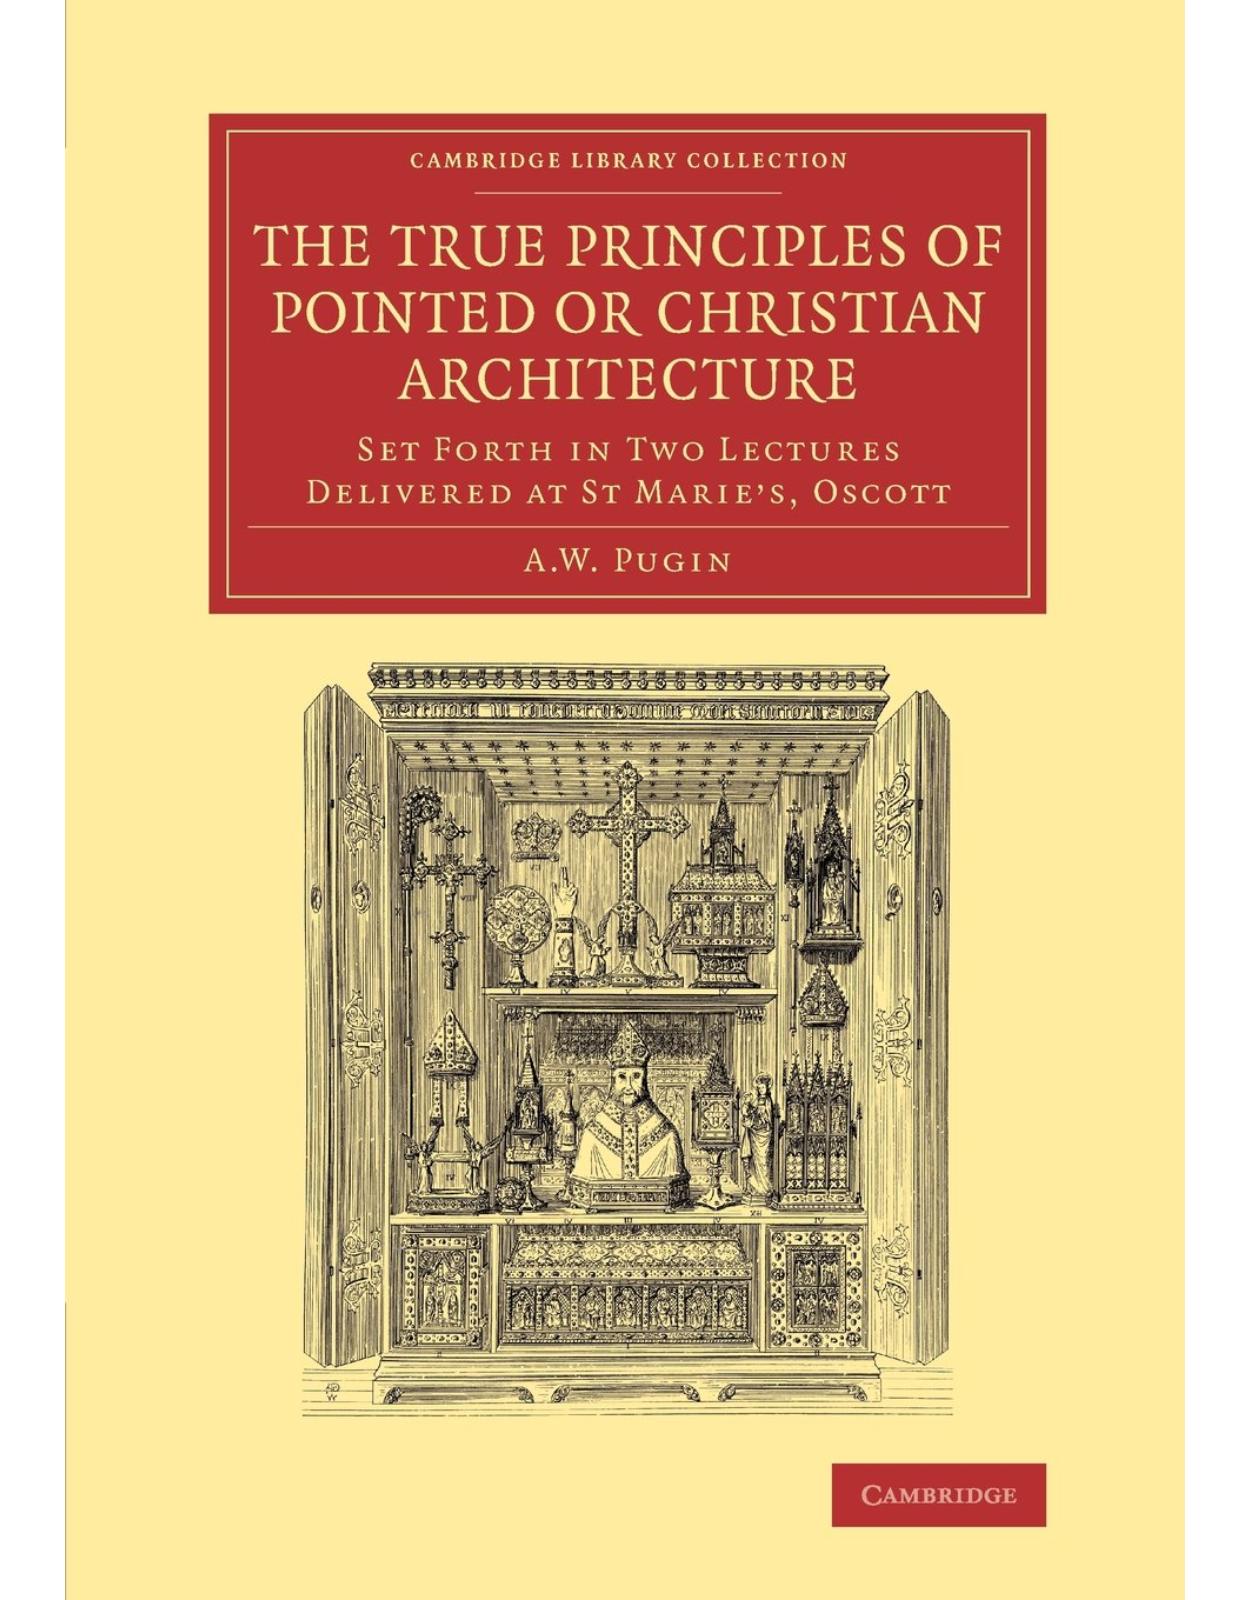 The True Principles of Pointed or Christian Architecture: Set Forth in Two Lectures Delivered at St Marie's, Oscott (Cambridge Library Collection - Art and Architecture)